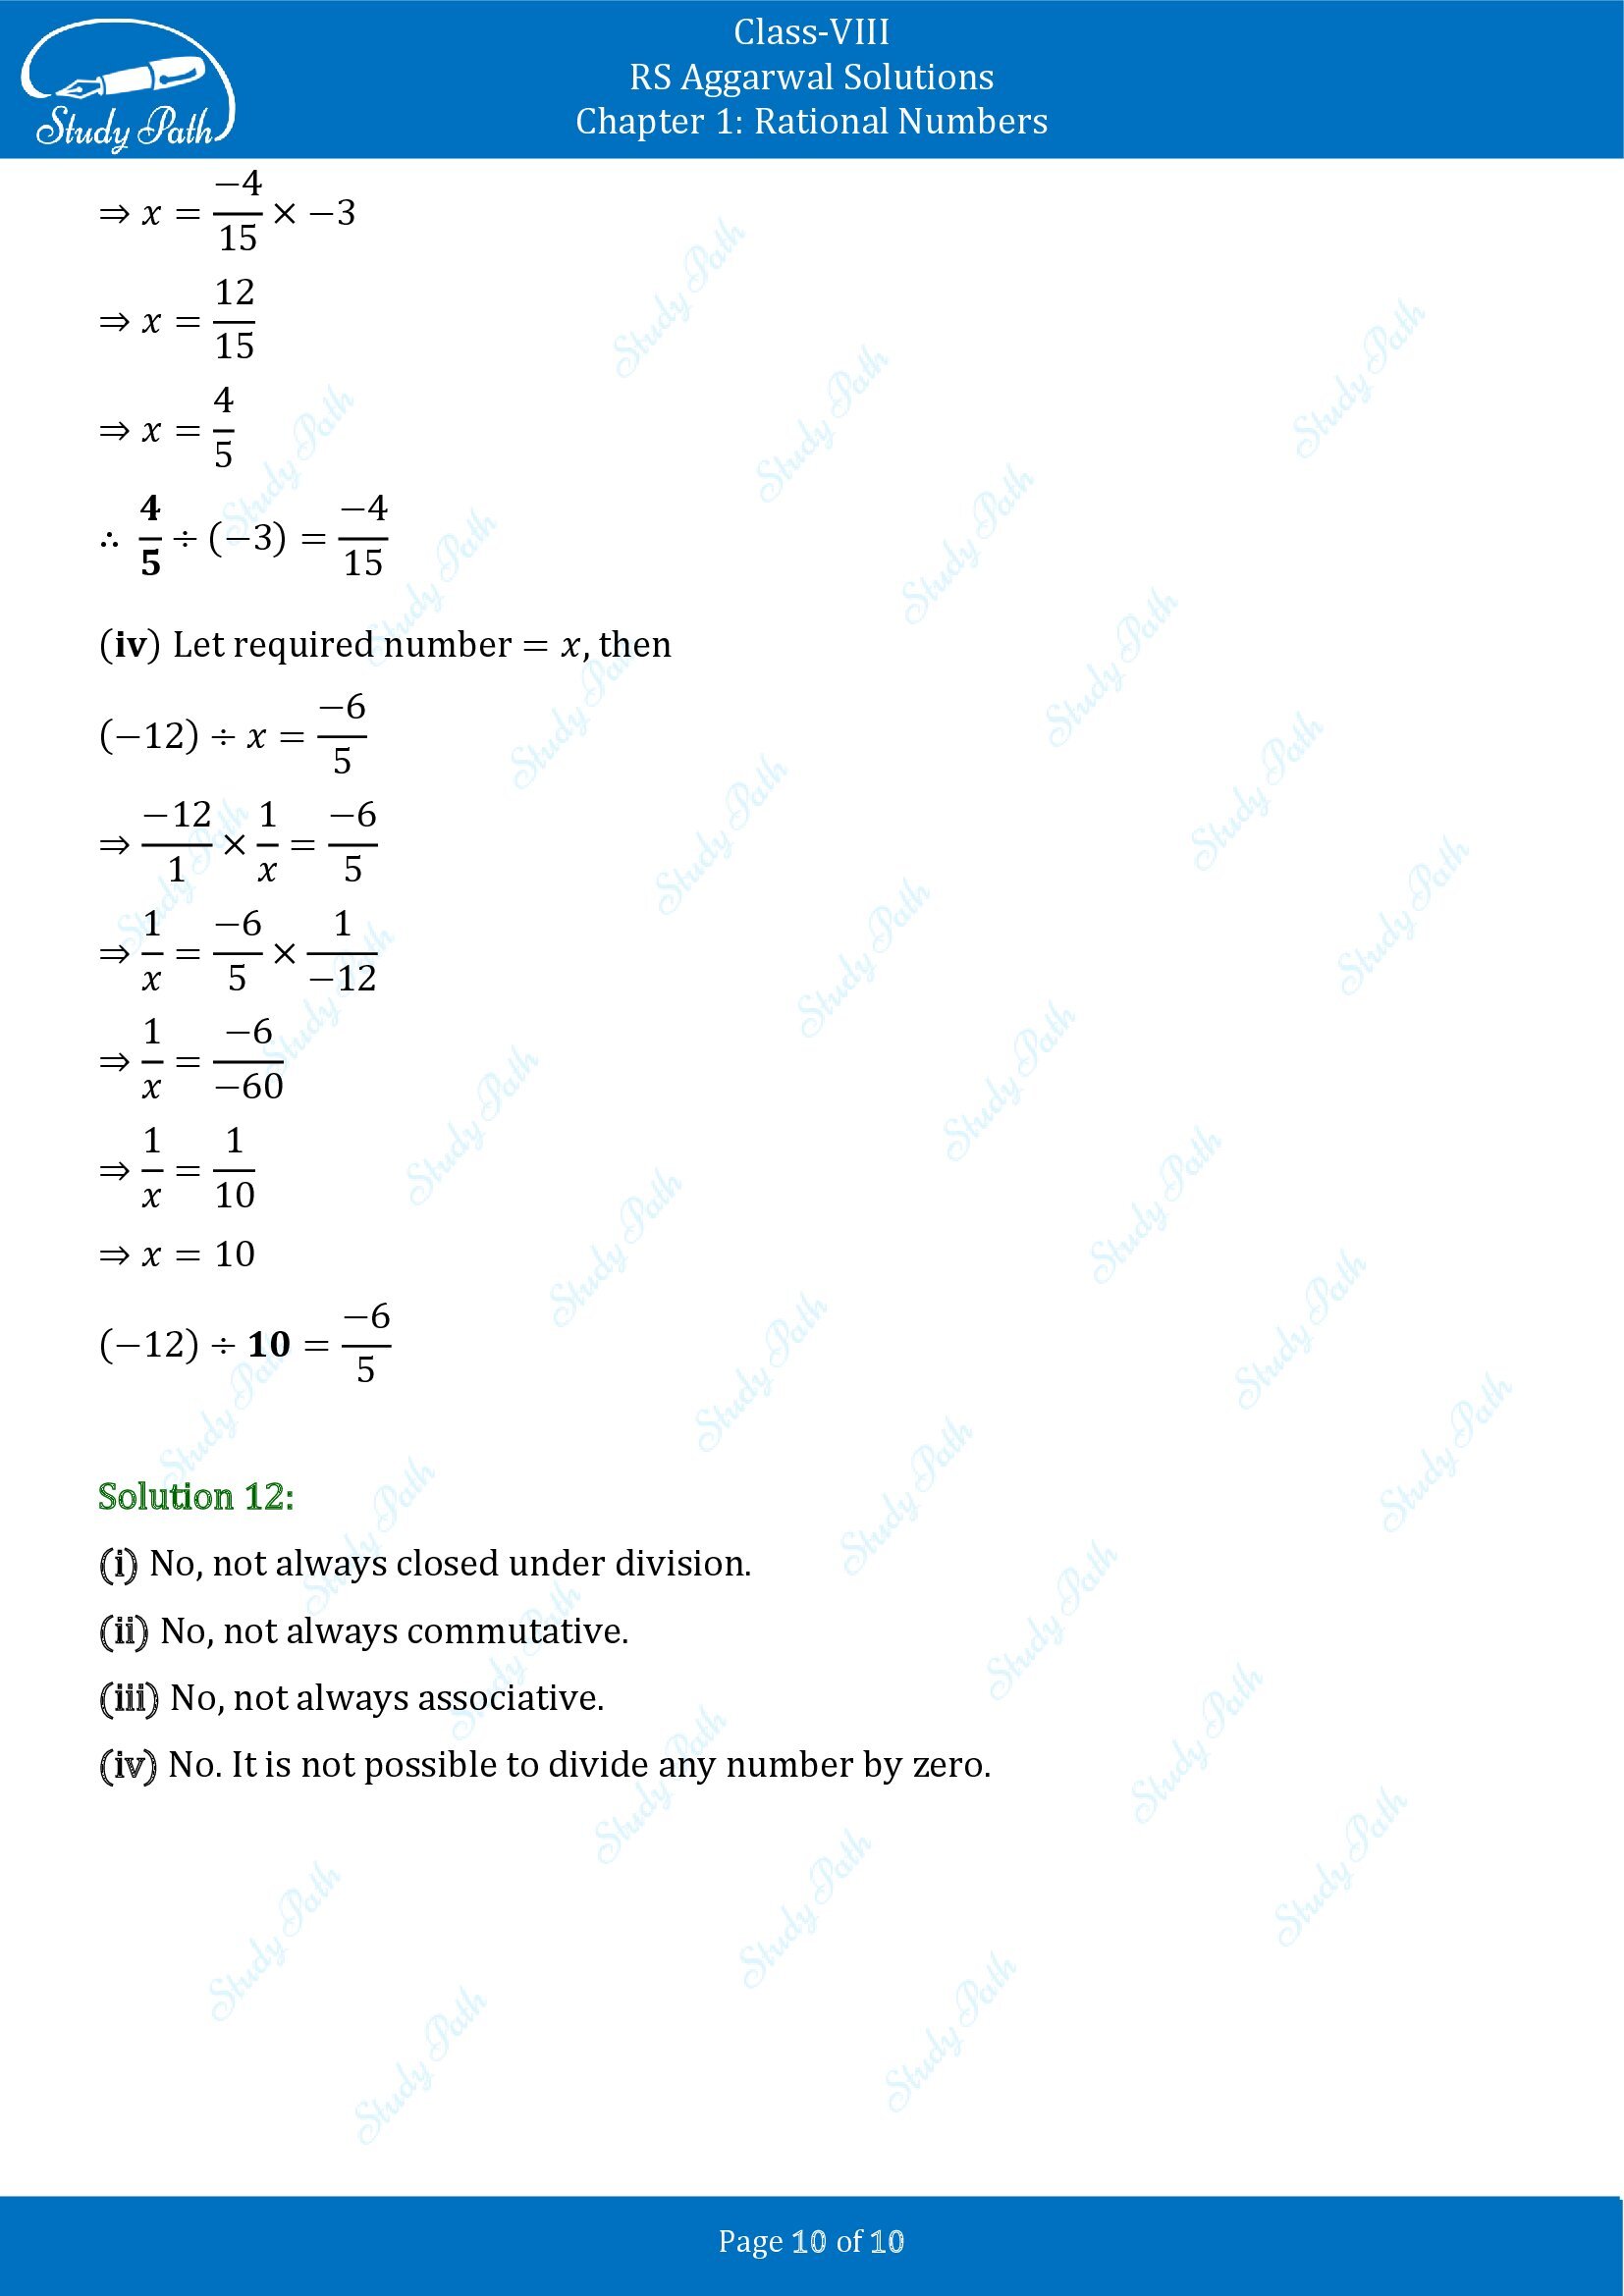 RS Aggarwal Solutions Class 8 Chapter 1 Rational Numbers Exercise 1E 00010